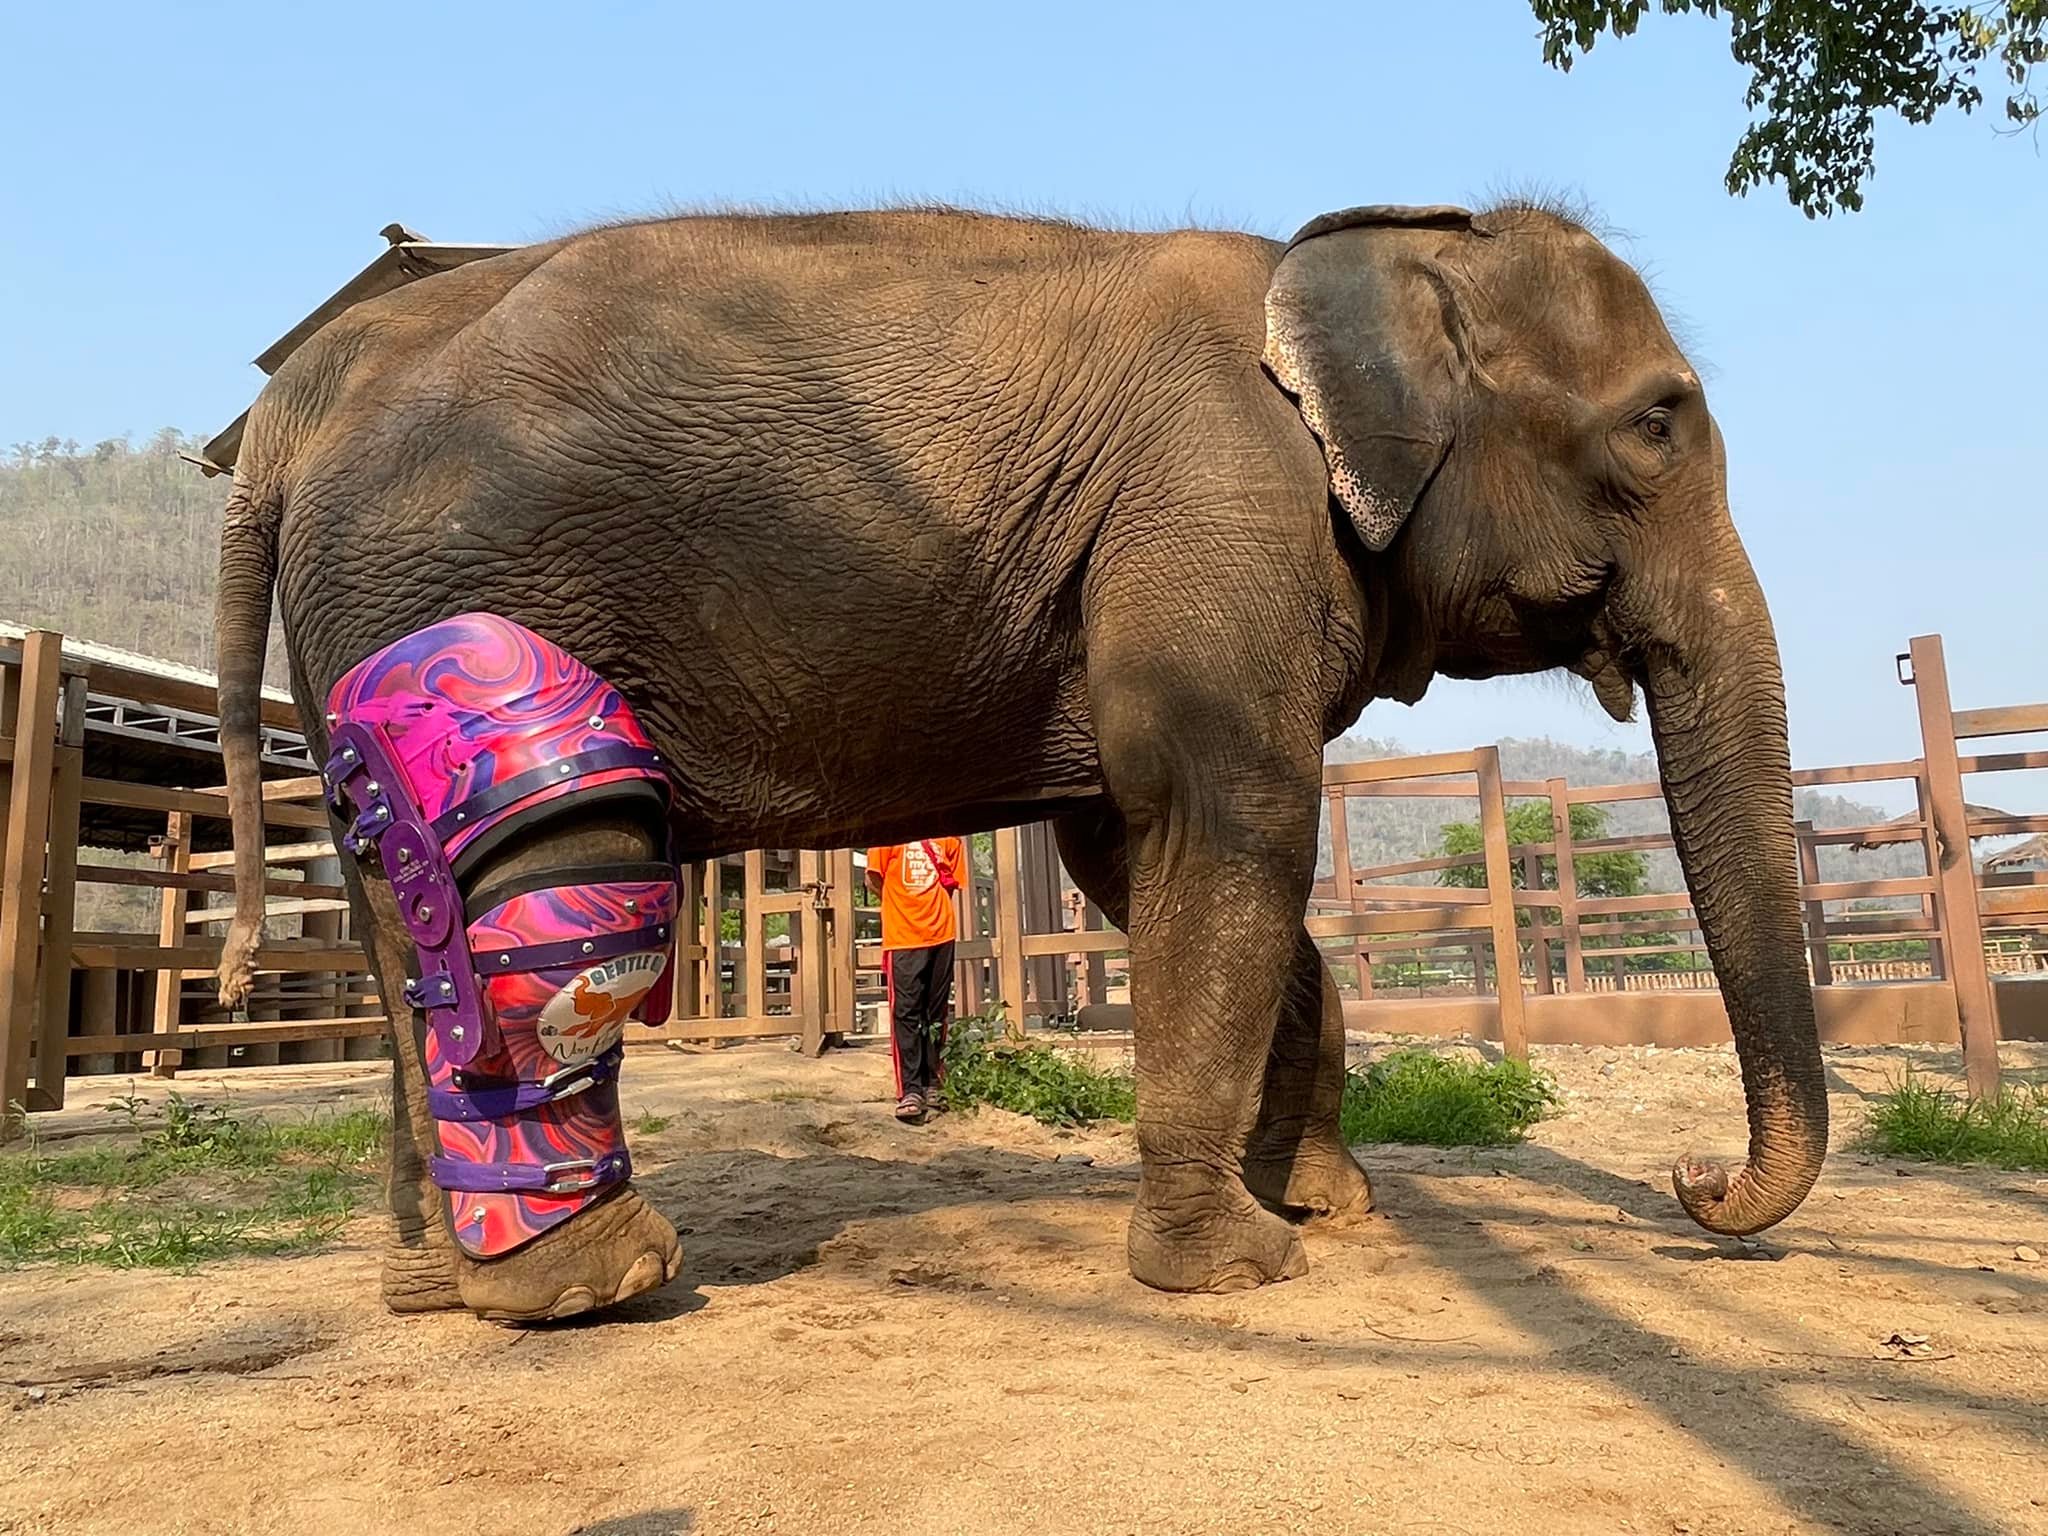 Congratulations to MaeMai who have received the prosthetic leg brace to support her injured leg.